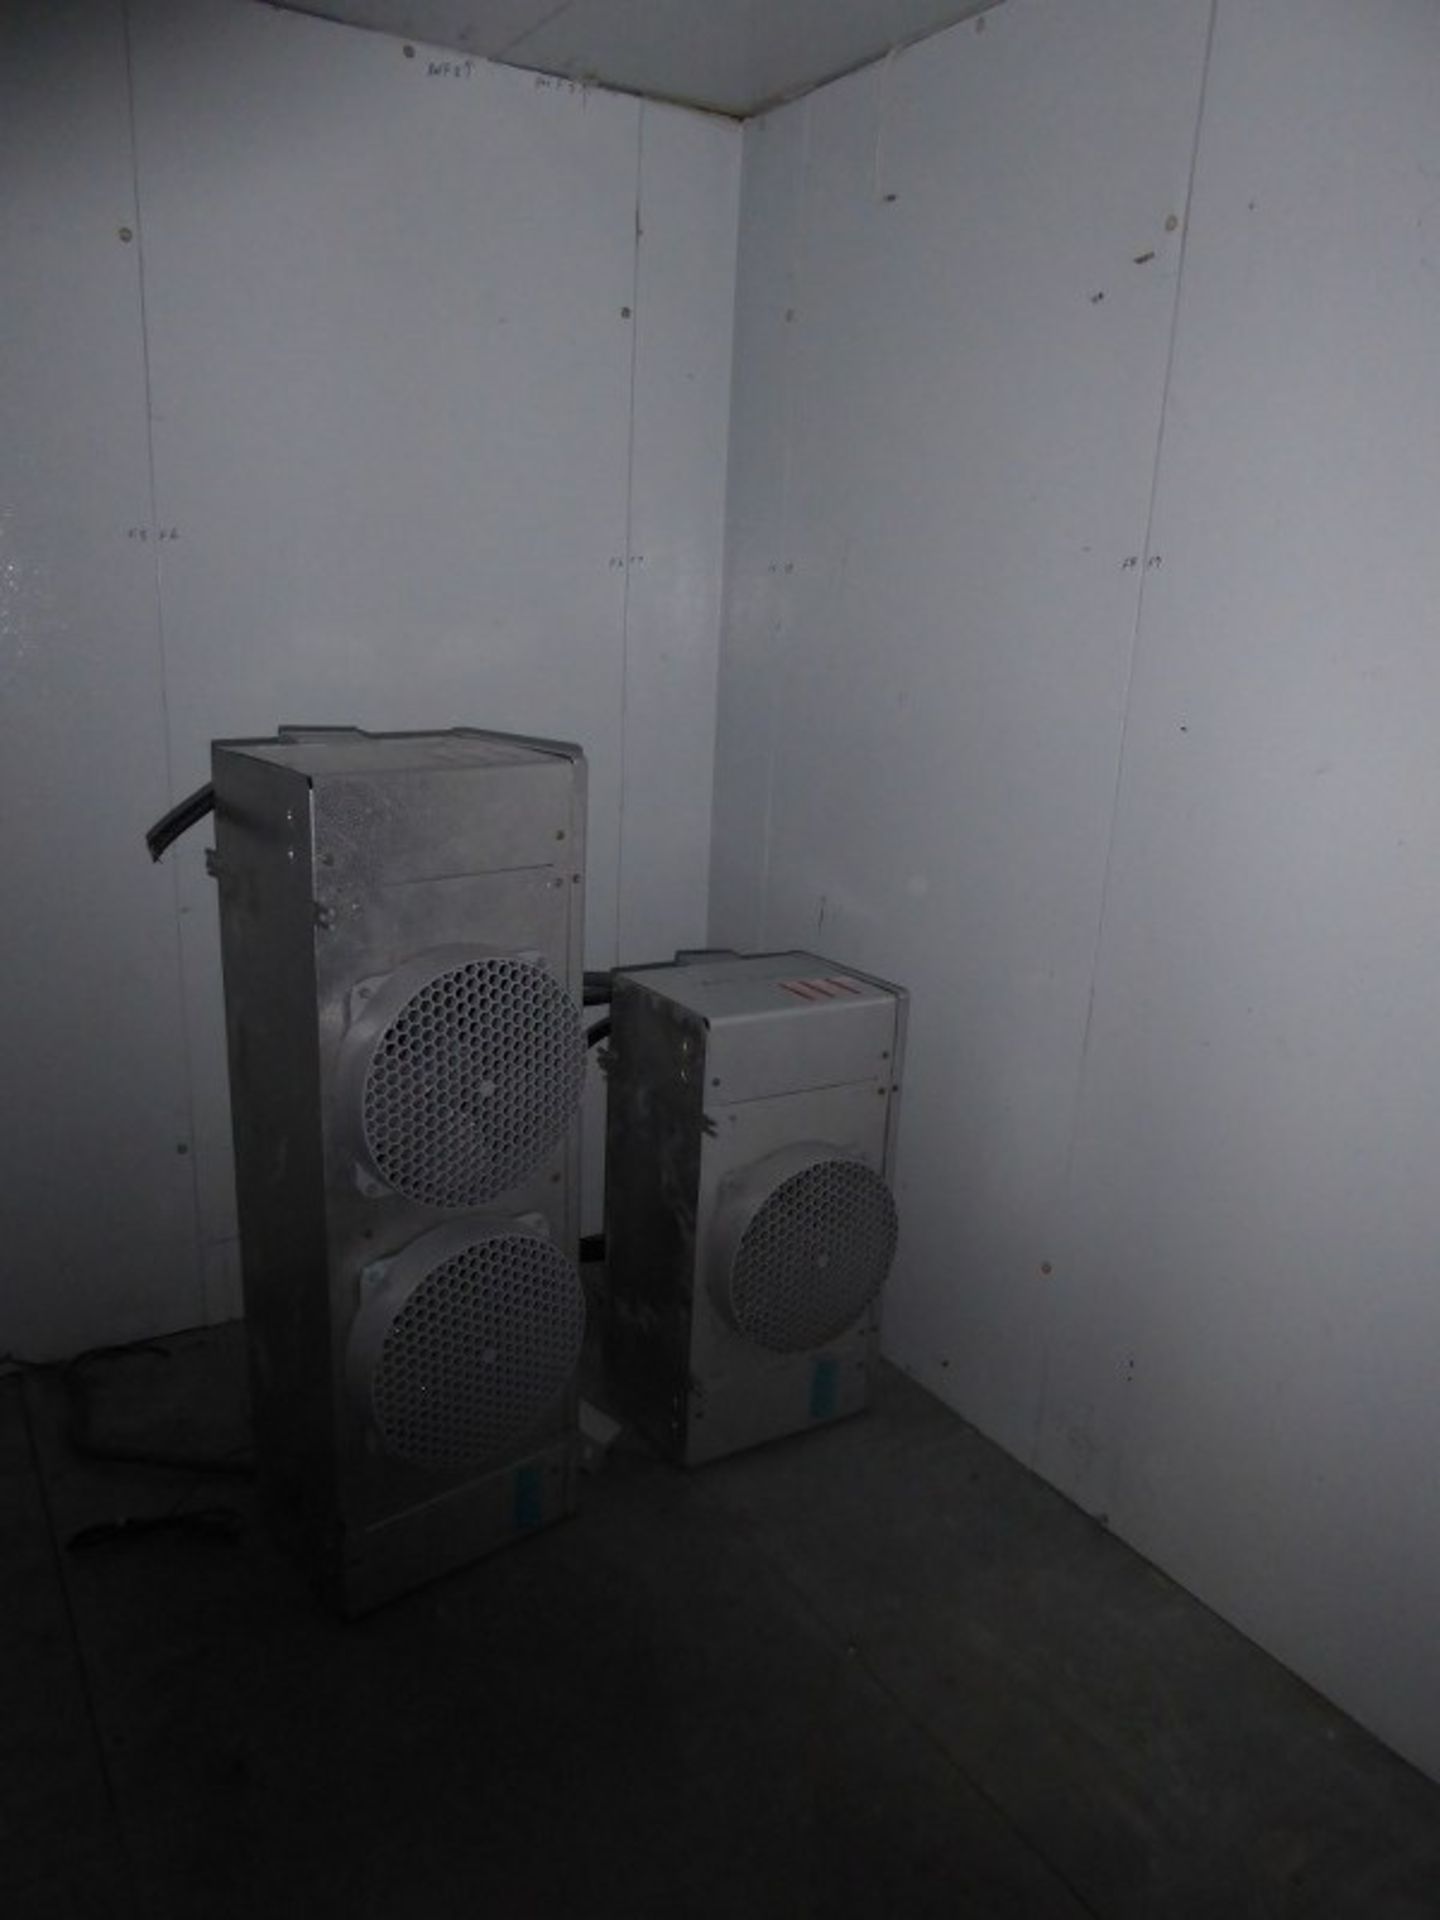 CURTIS REFRIGERATION -12' X 10' INSULATED WALK IN FREEZER (10'x5.5') /REFRIGERATOR (10'x6') COMBO - Image 7 of 14